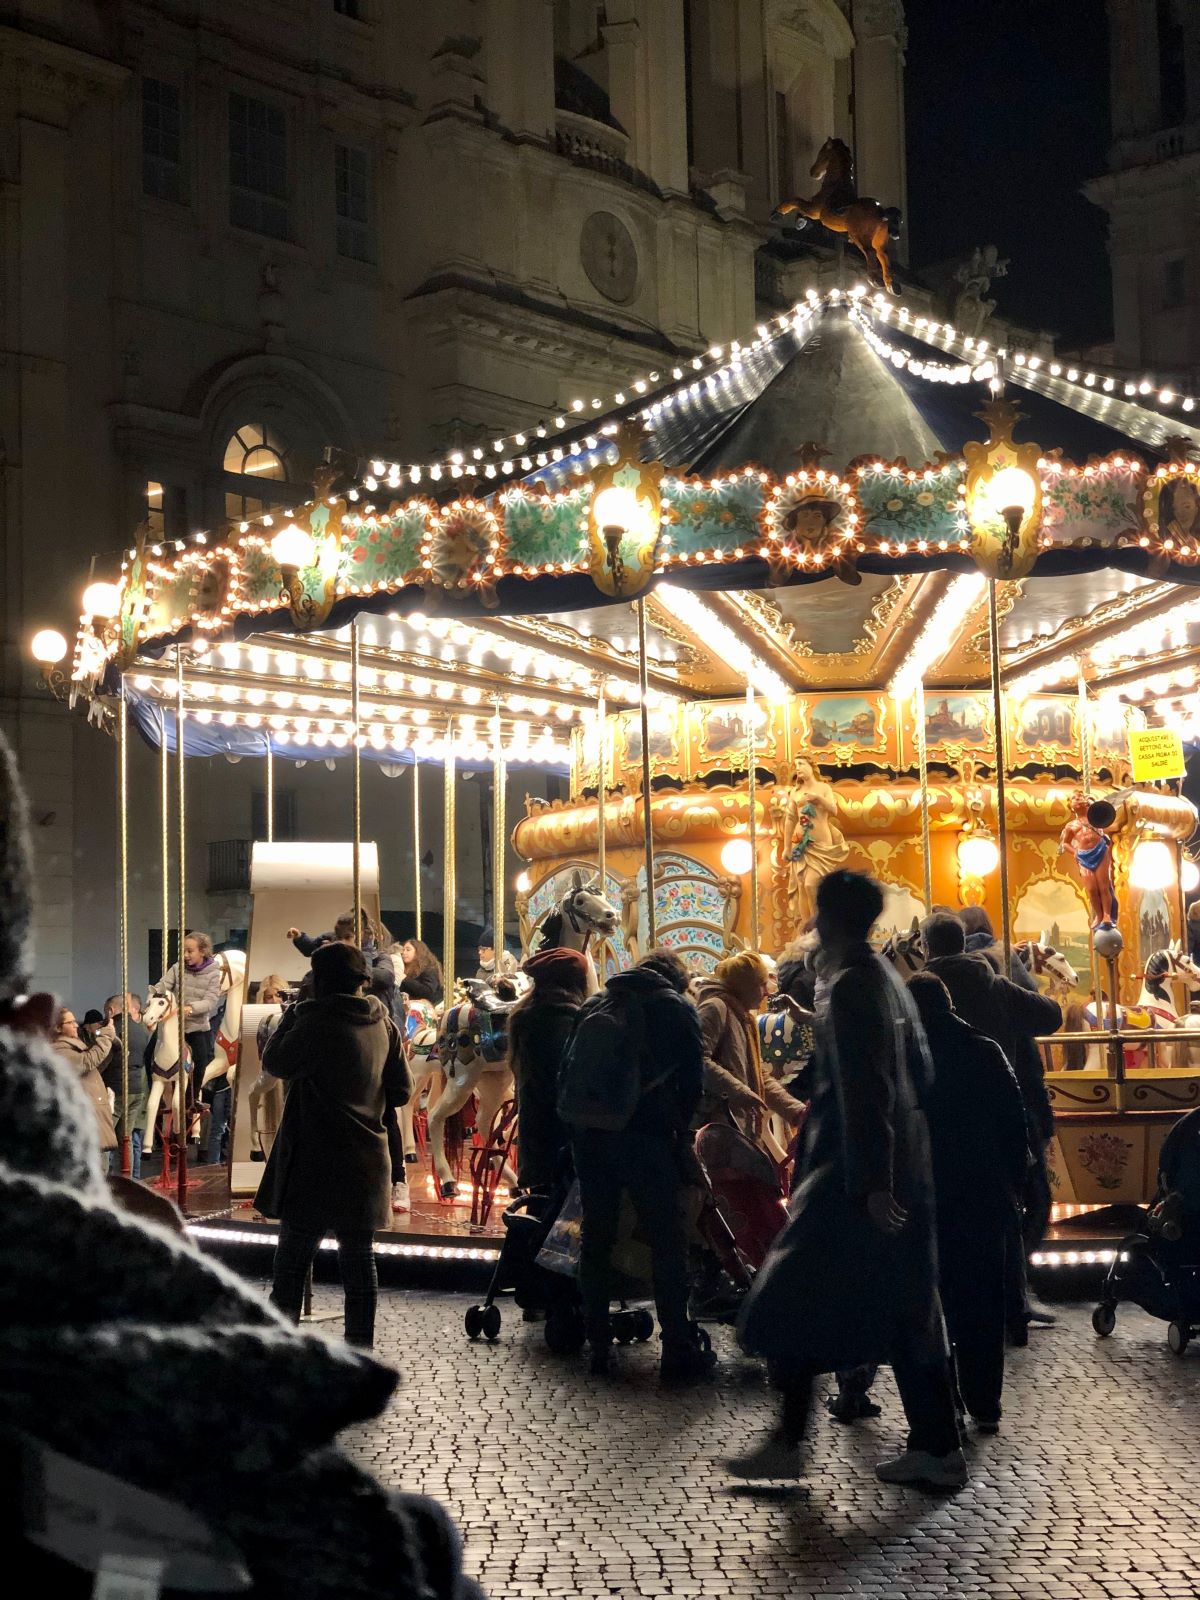 merry-go-round lit up at Christmas market in Rome. 